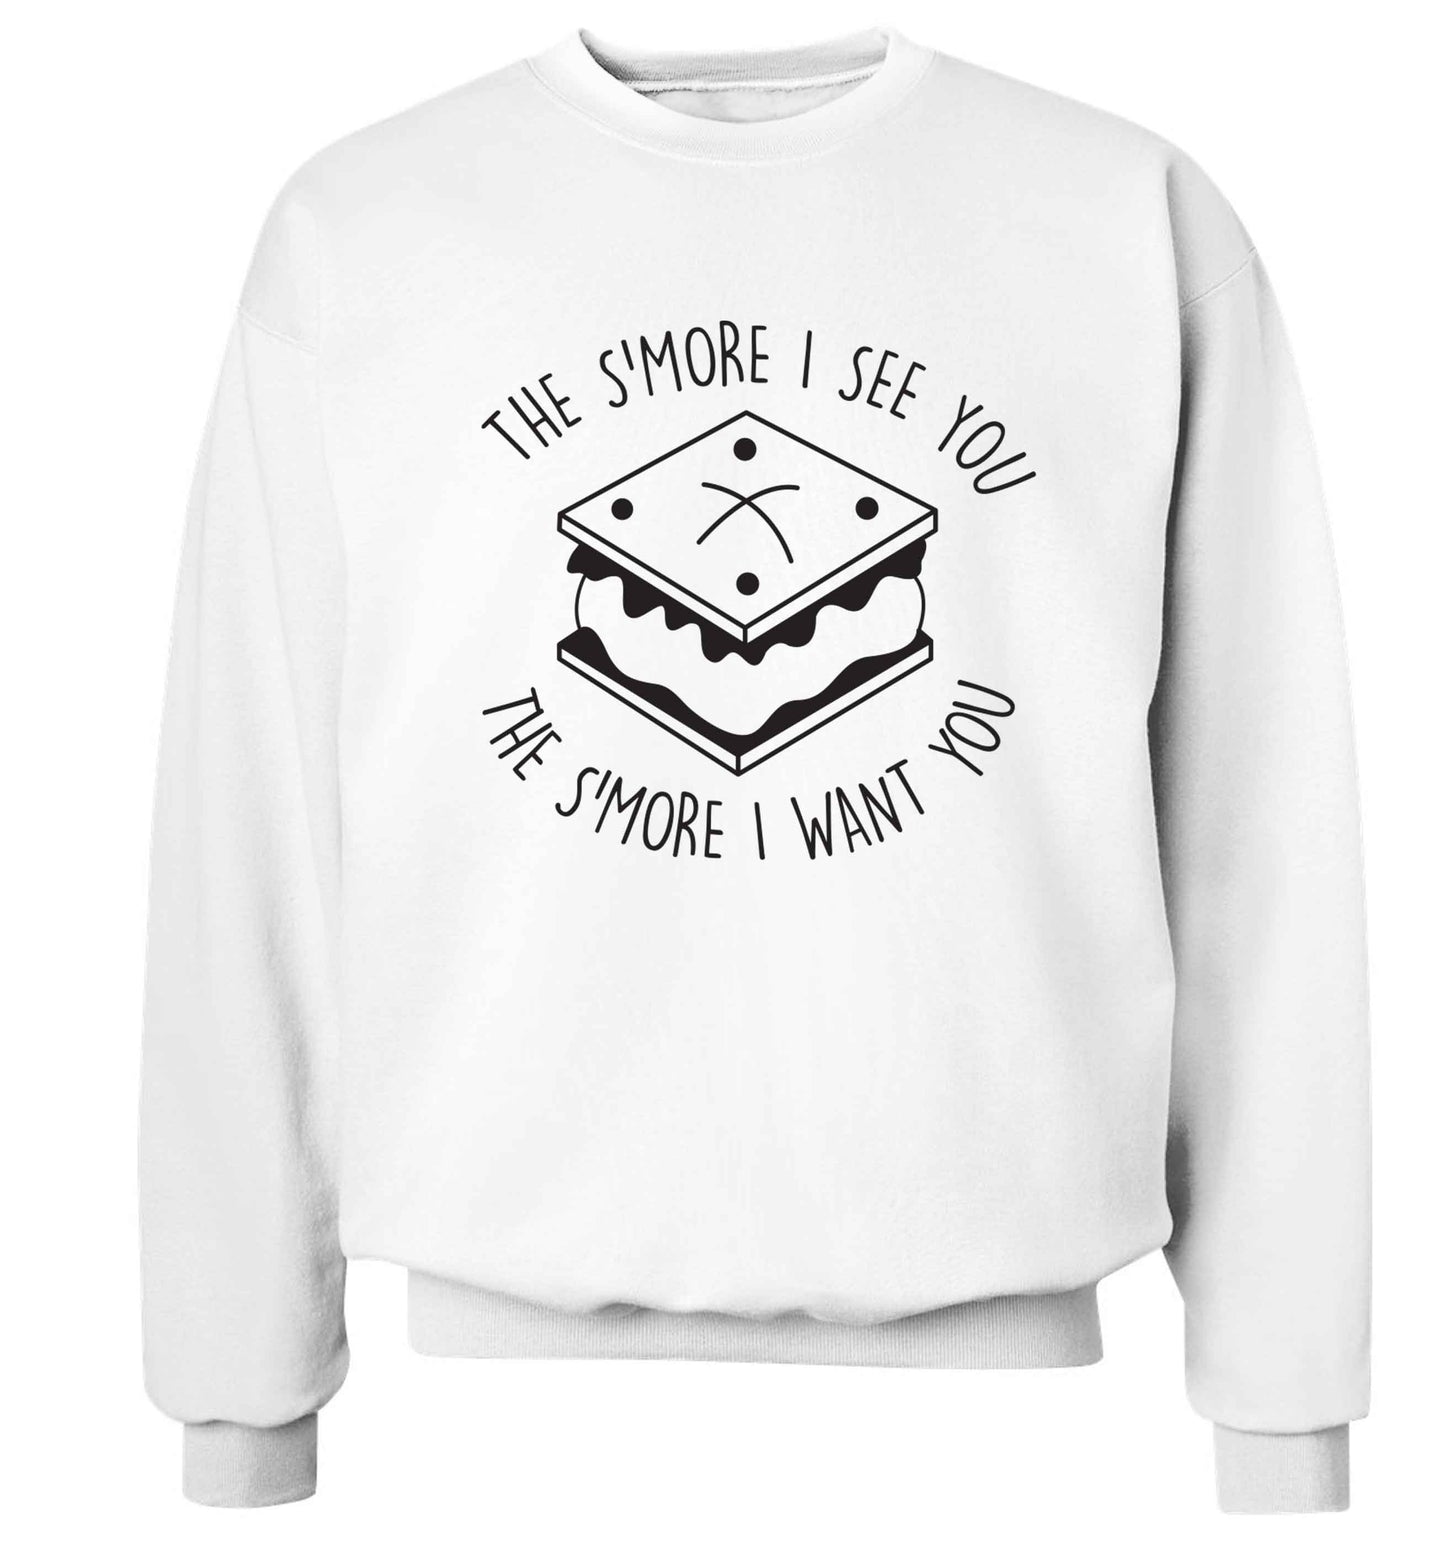 The s'more I see you the s'more I want you Adult's unisex white Sweater 2XL